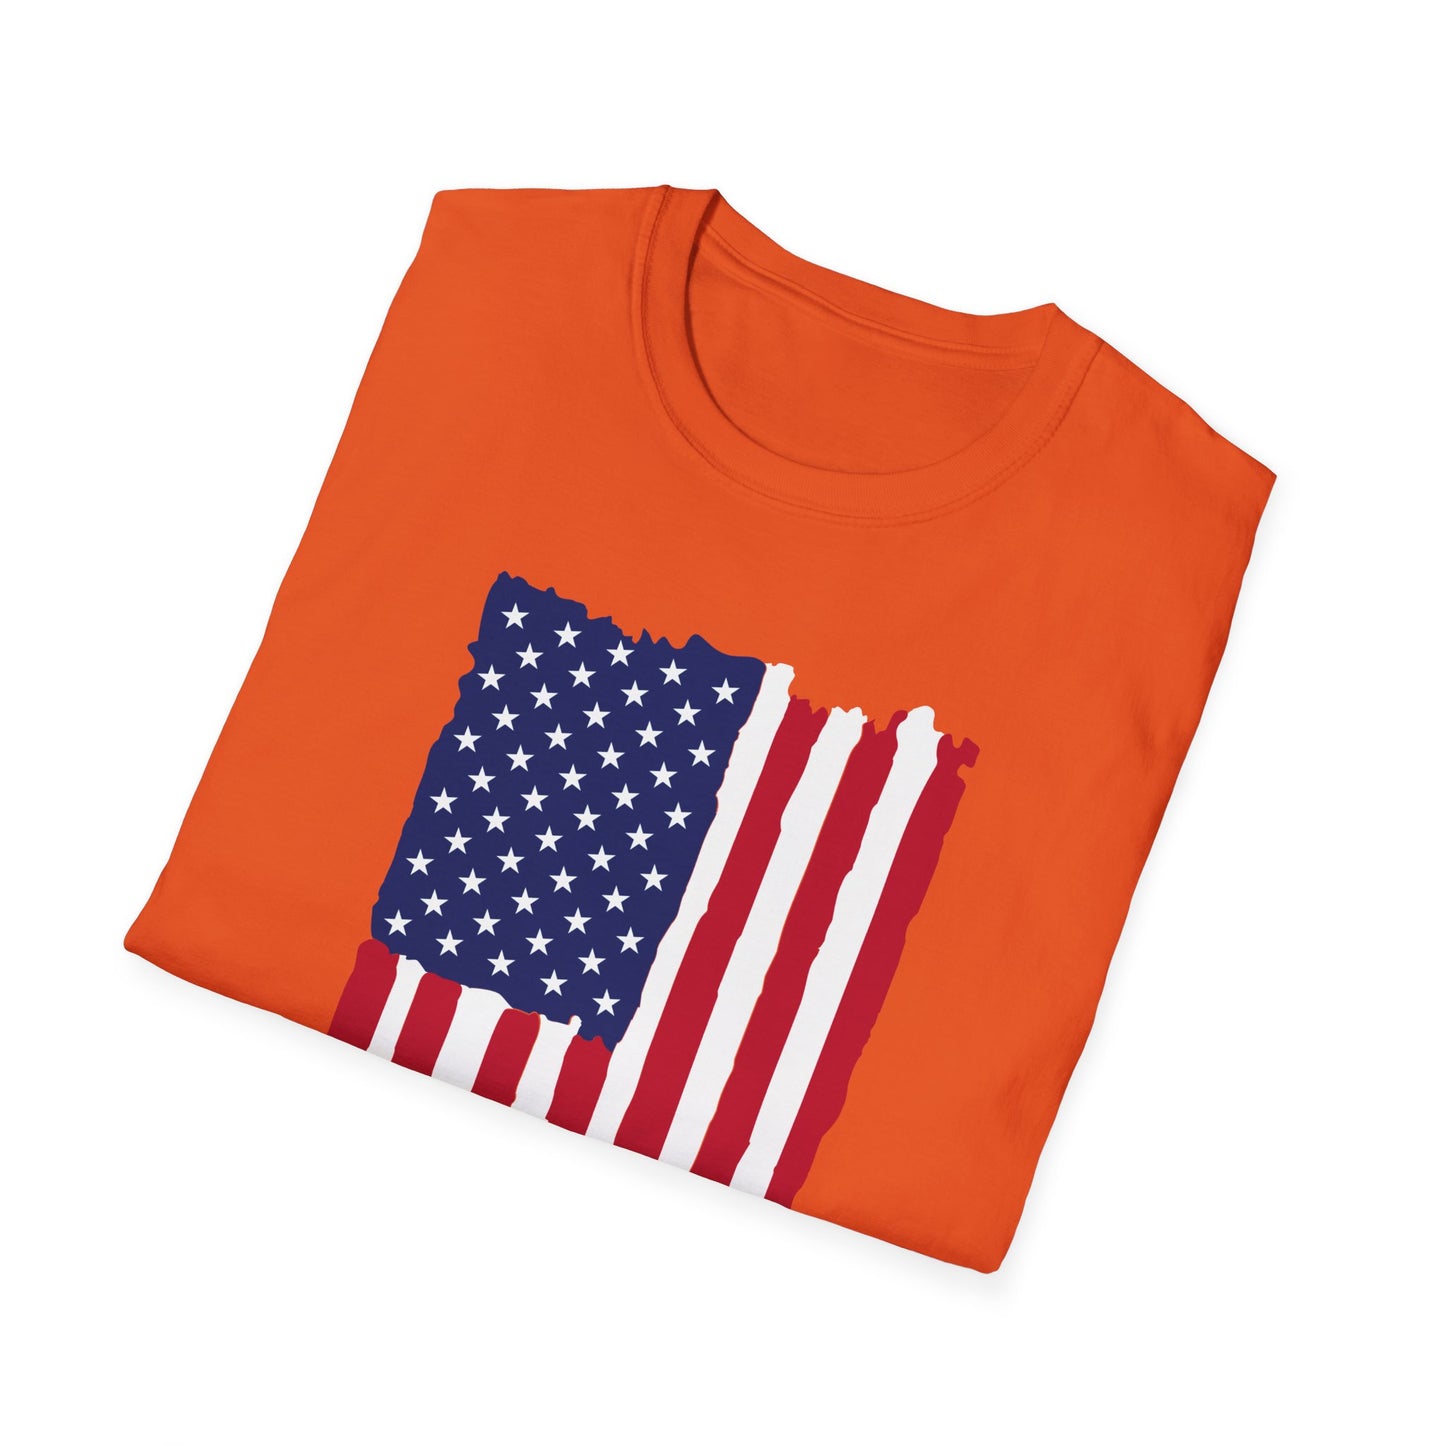 Distressed Vertical American Flag Color - Unisex Softstyle T-Shirt